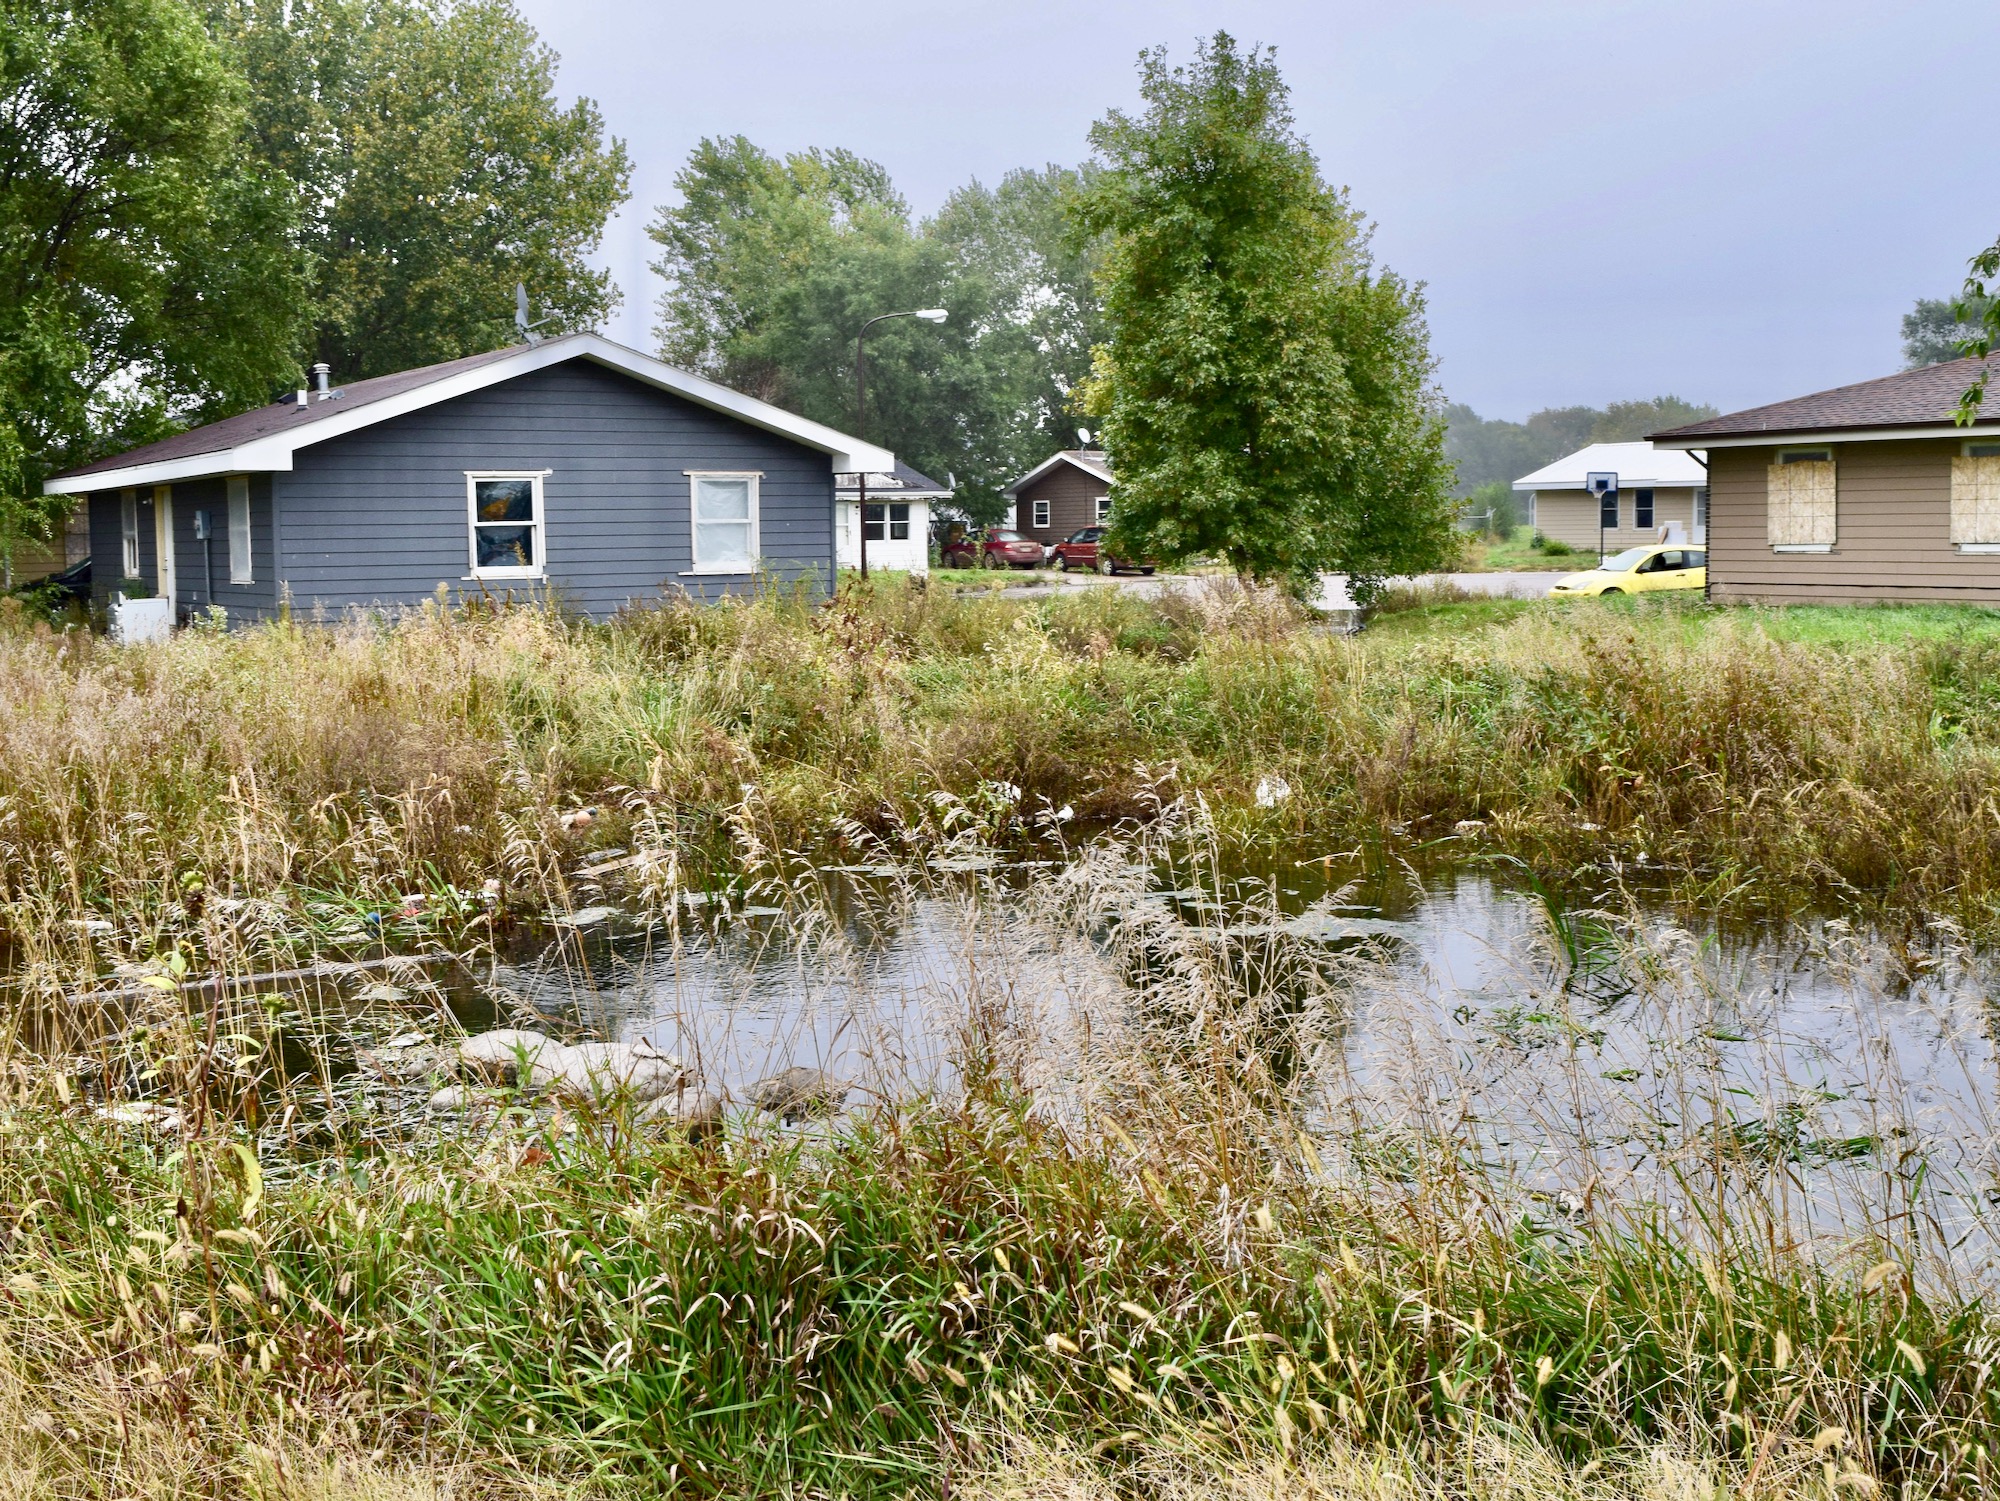 Yankton Sioux: 'Our community is literally drowning'